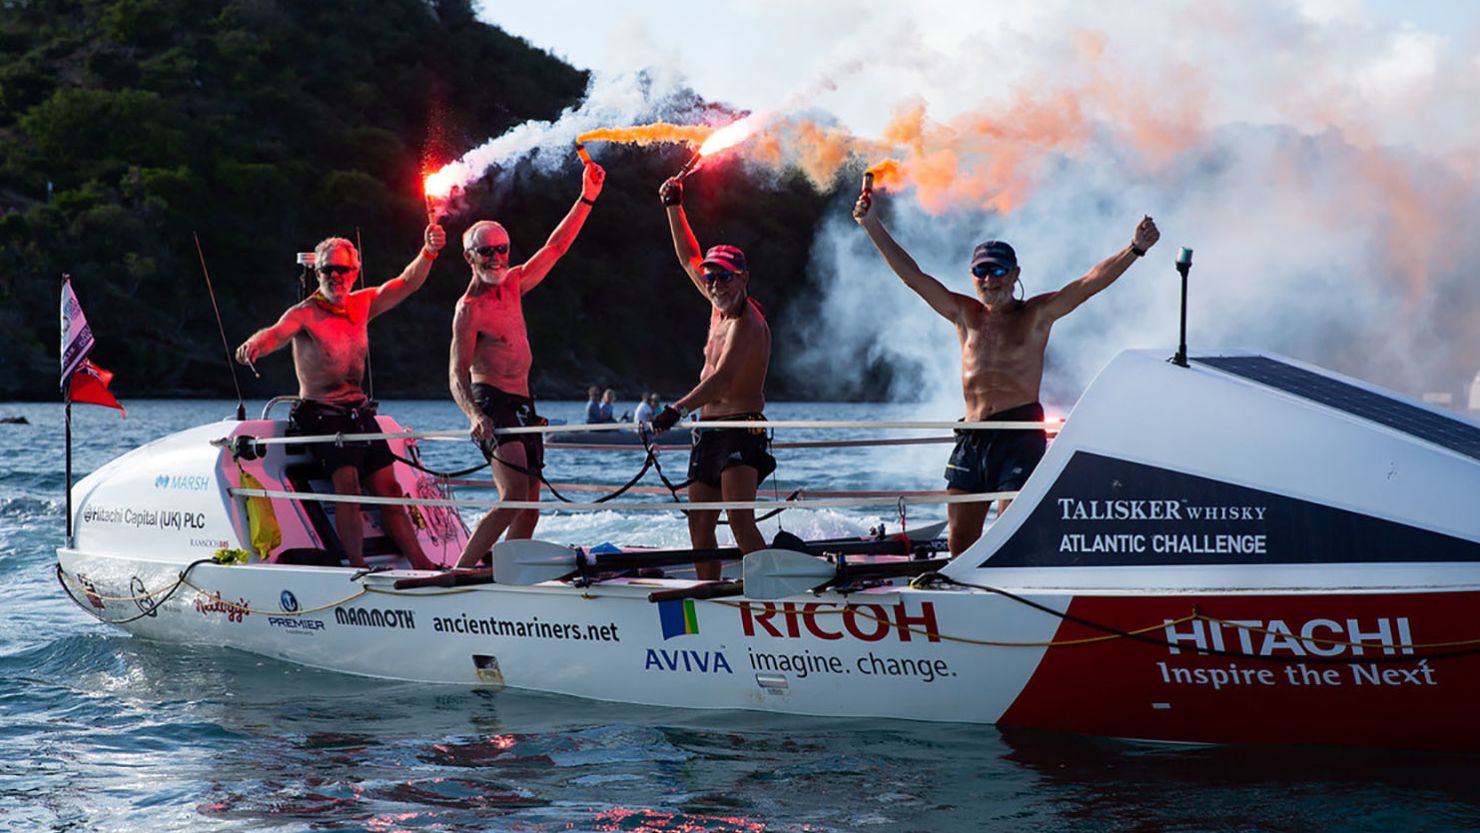 The men claimed the world record for the oldest crew of four to row across the Atlantic.